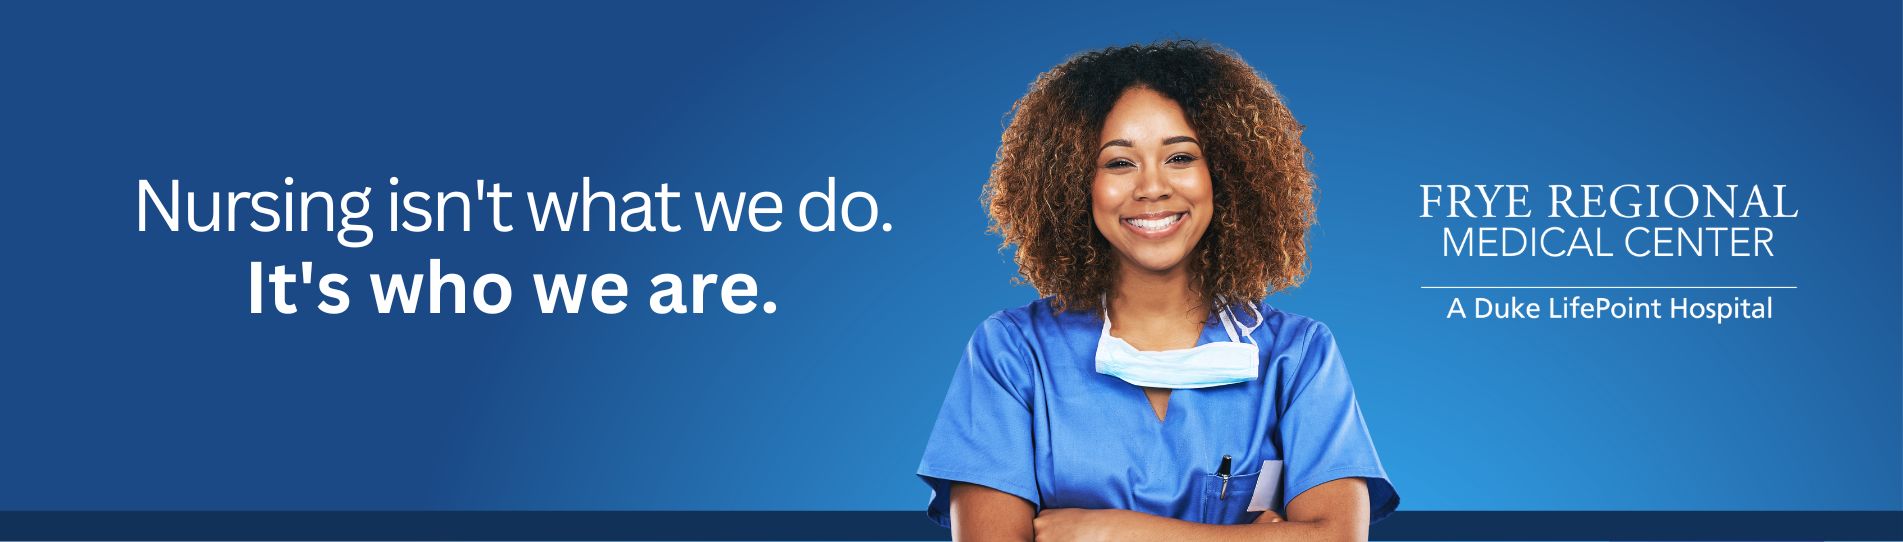 Nursing isn't what we do. It's who we are. 